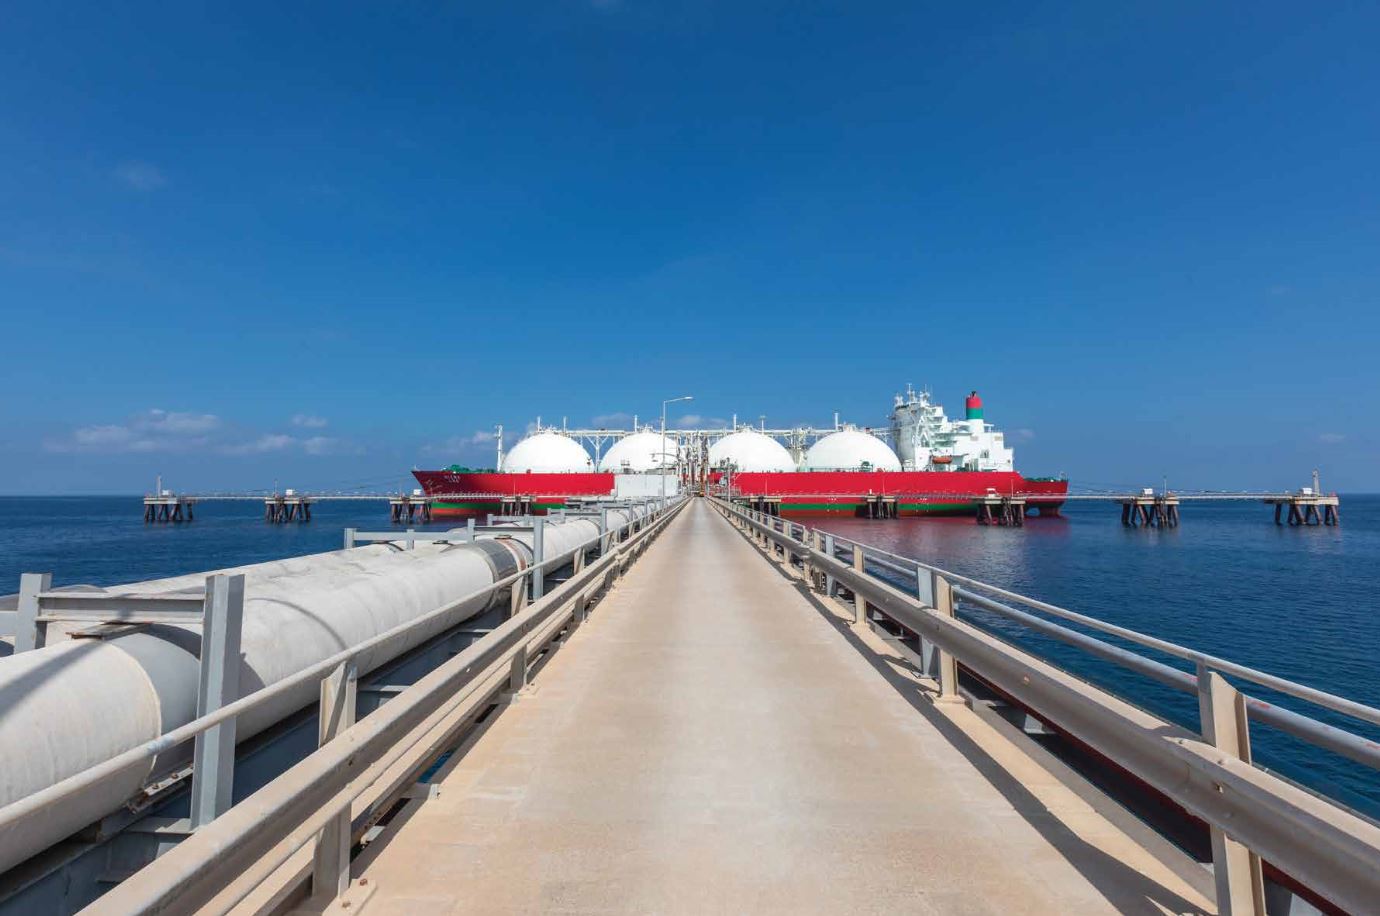 TotalEnergies inks deal for Oman LNG bunkering project